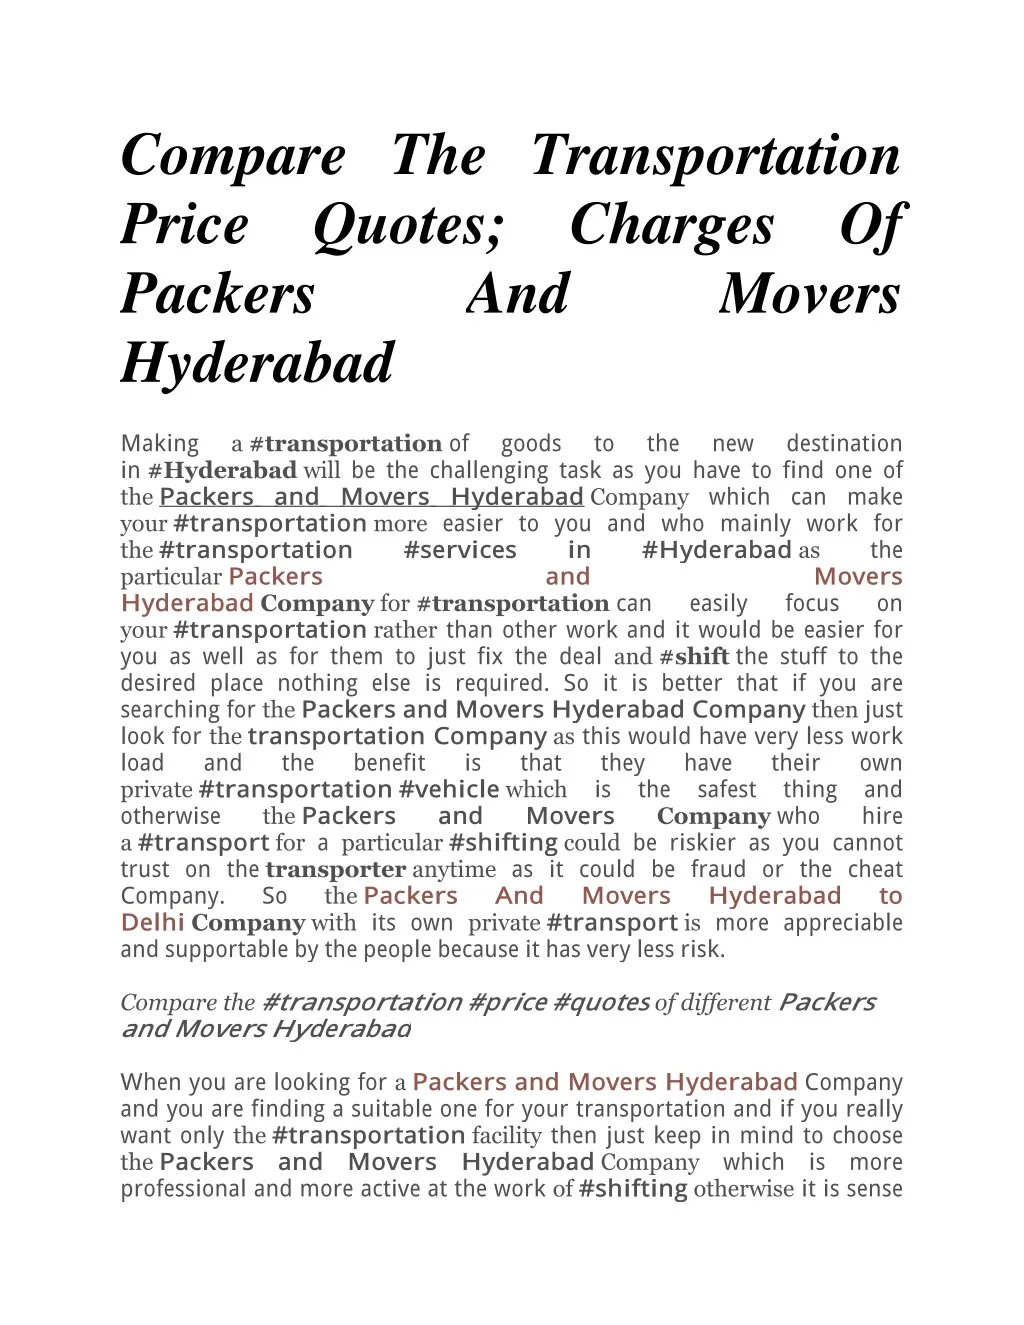 compare the transportation price quotes charges